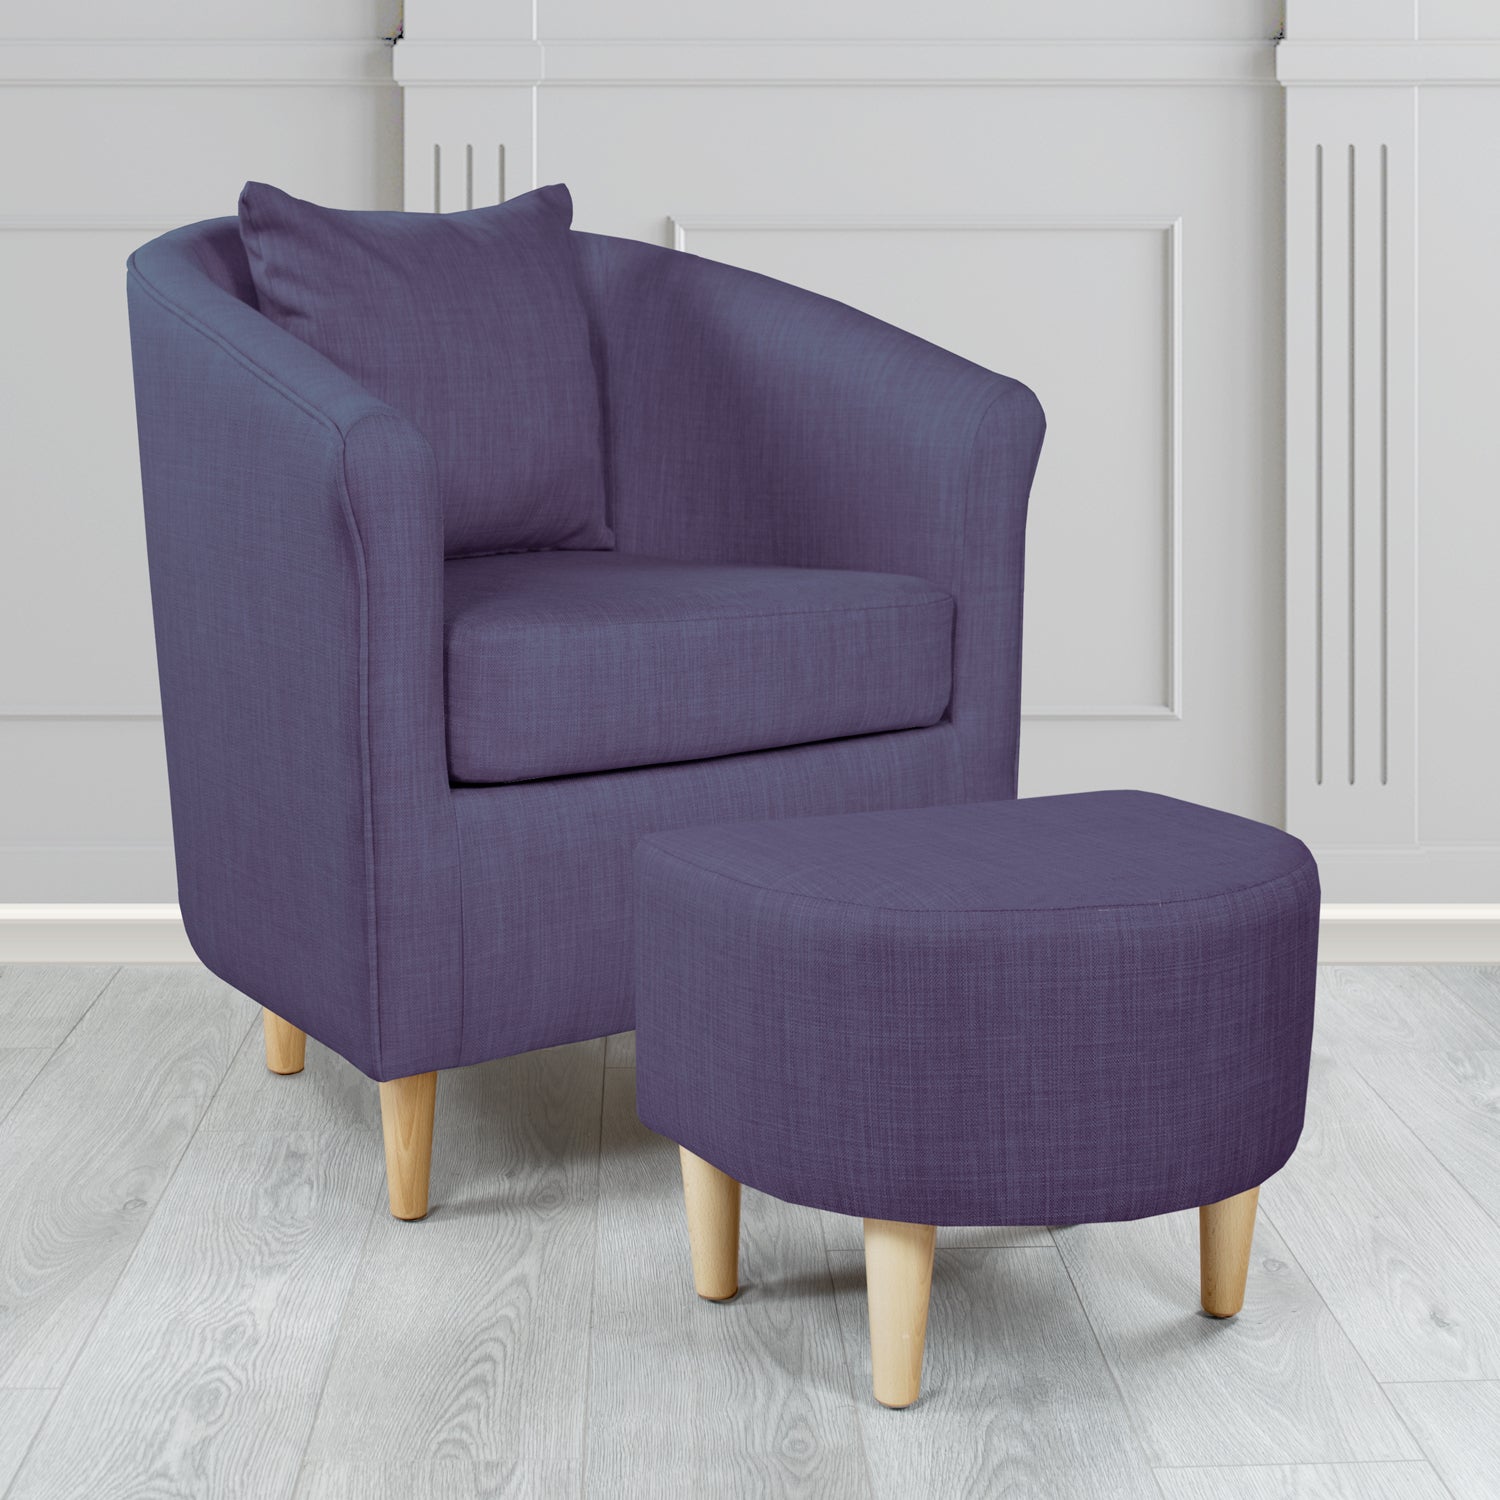 St Tropez Charles Purple Plain Linen Fabric Tub Chair & Footstool Set with Scatter Cushion - The Tub Chair Shop